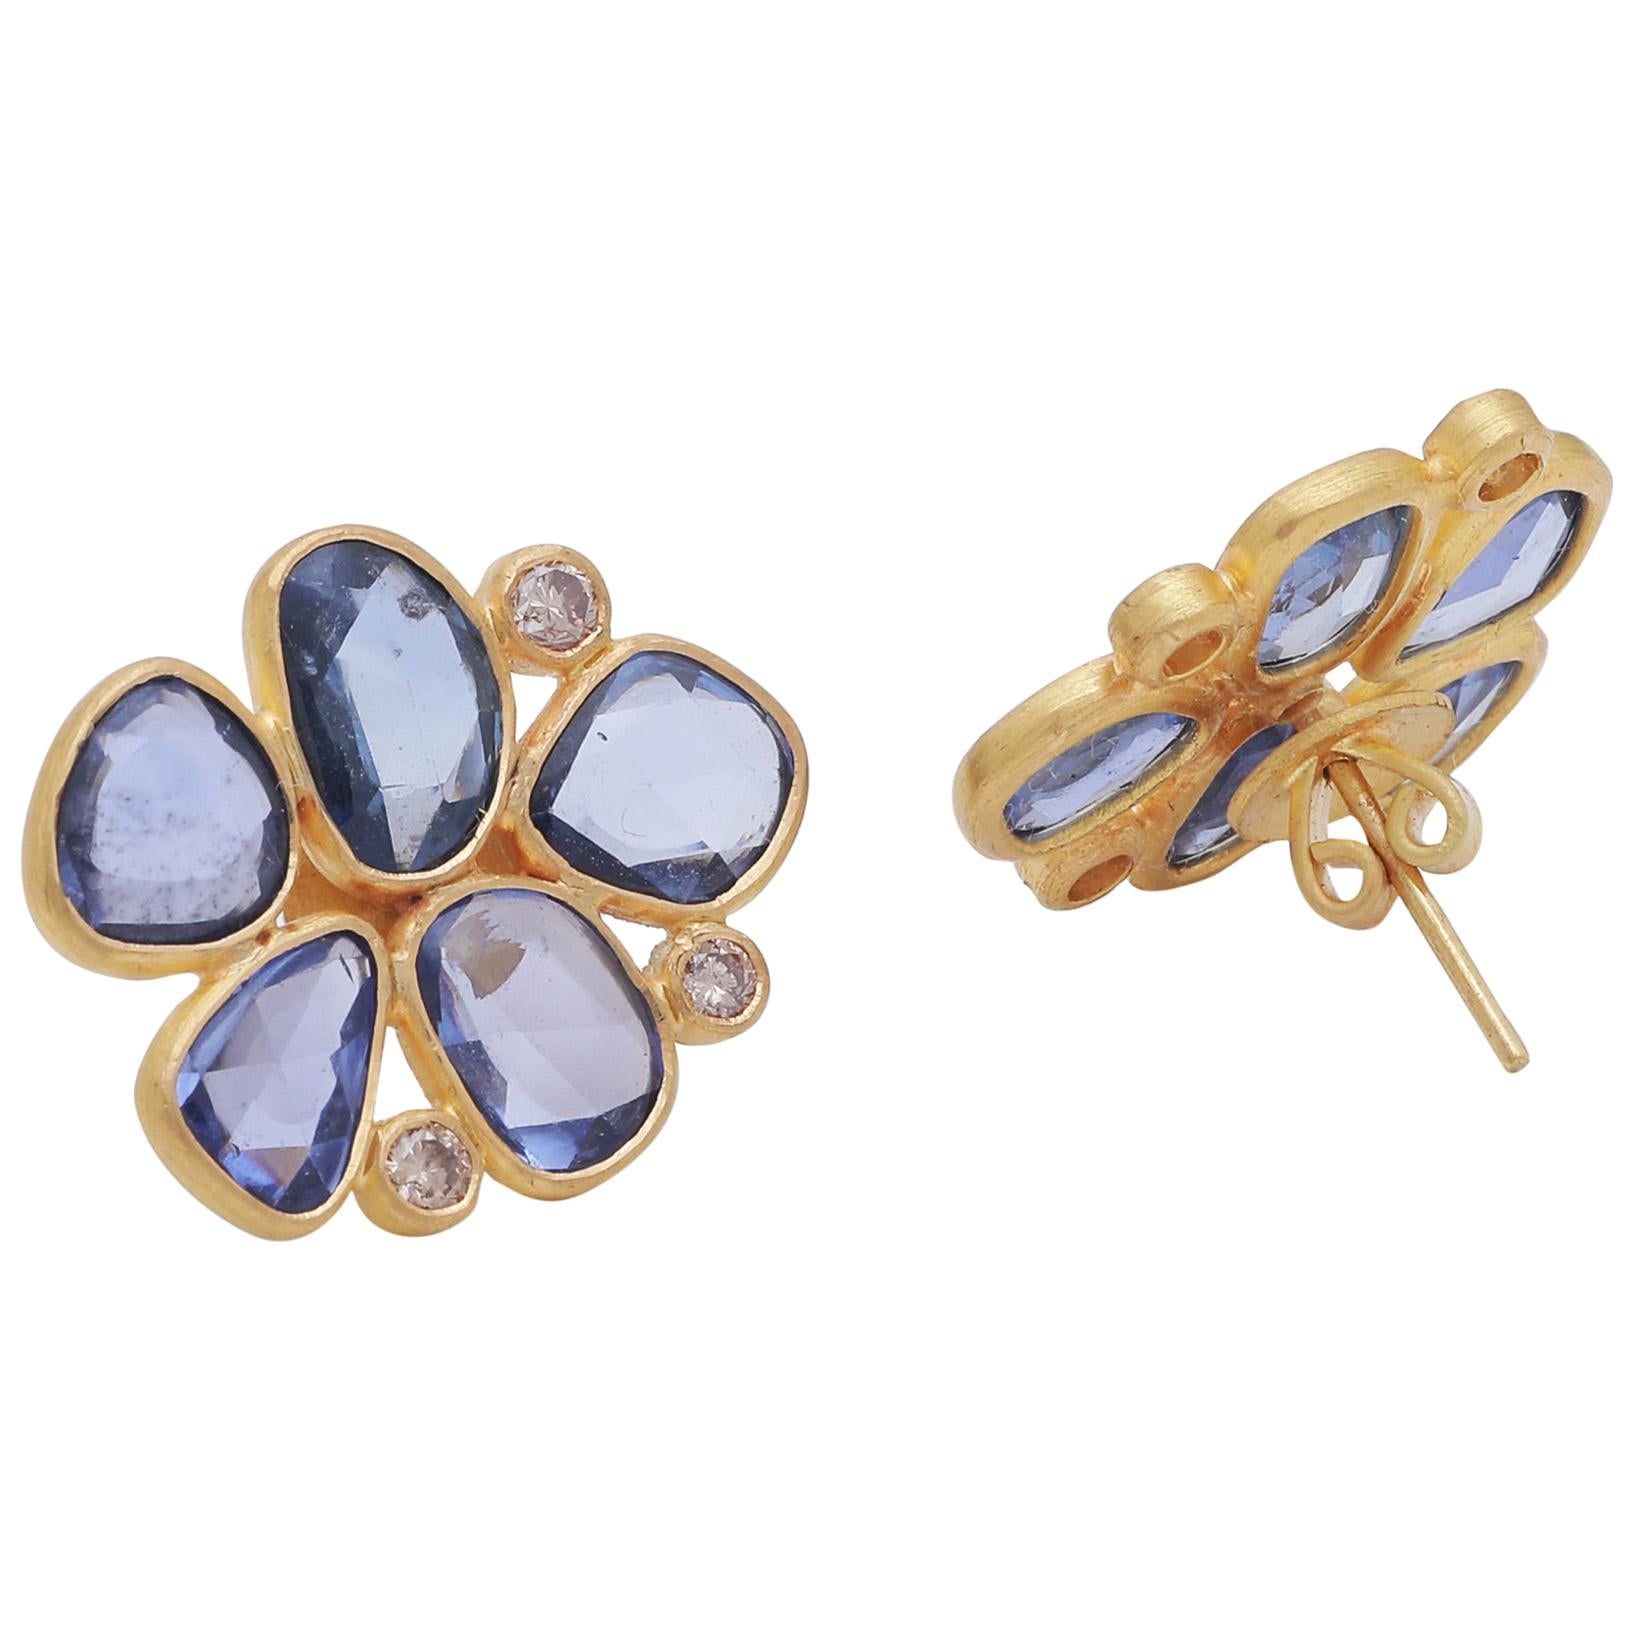 Sapphire Rose Cut and Diamond Earring Pair Handcrafted in 22 Karat Yellow Gold